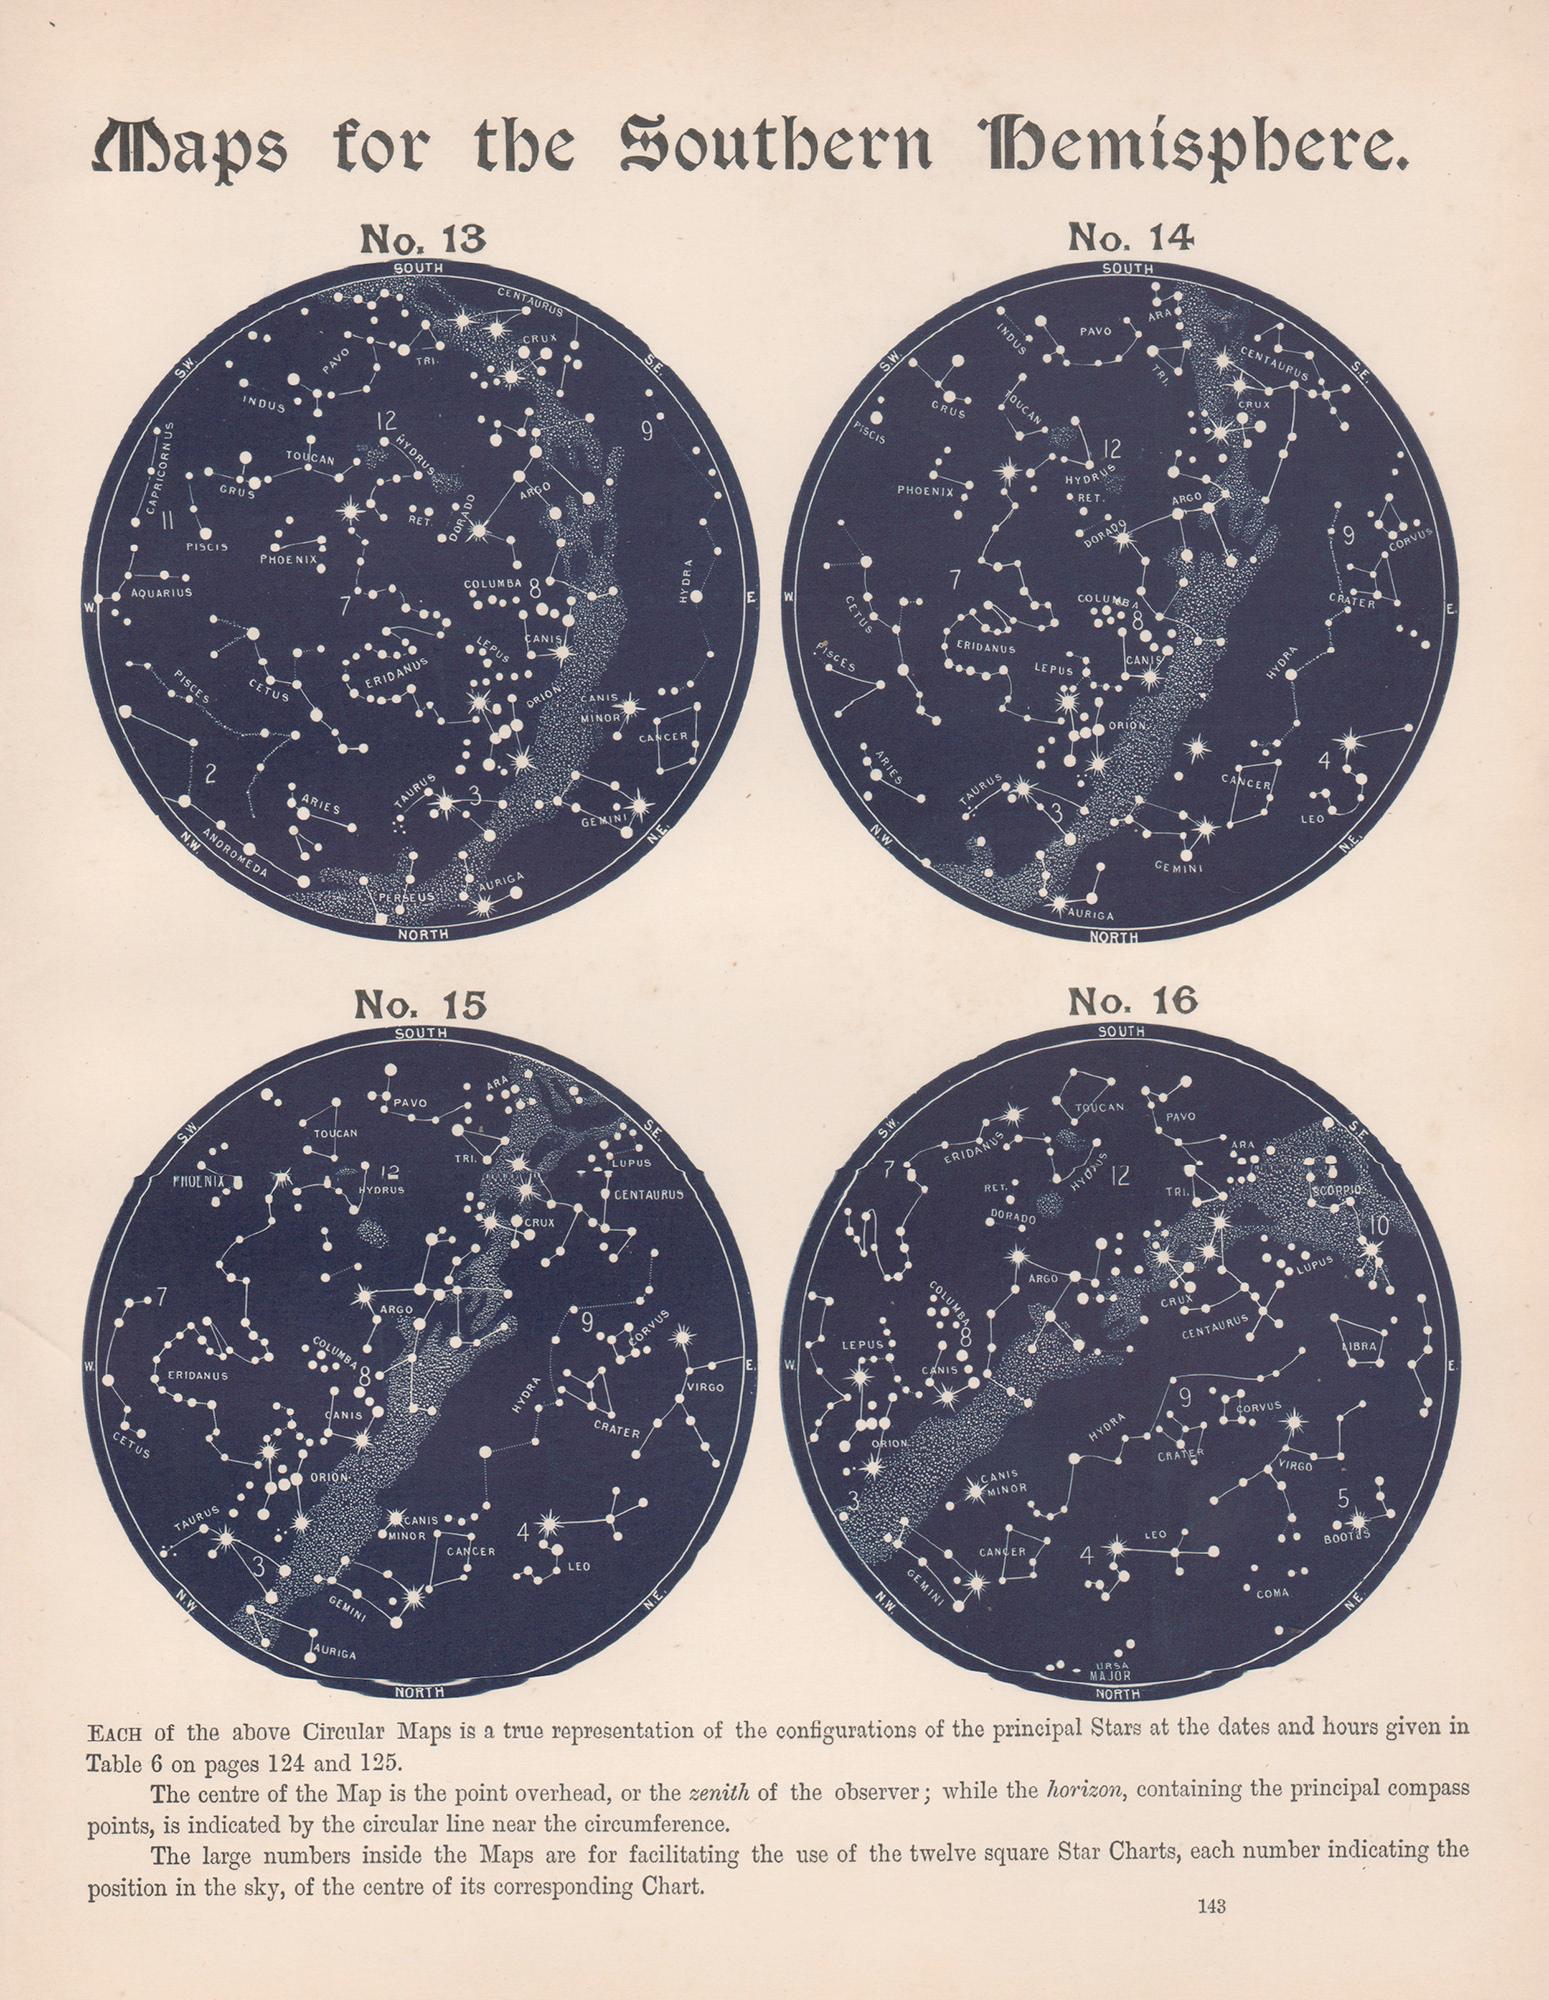 William Peck Print - Maps for the Southern Hemisphere. Antique Astronomy star constellation print